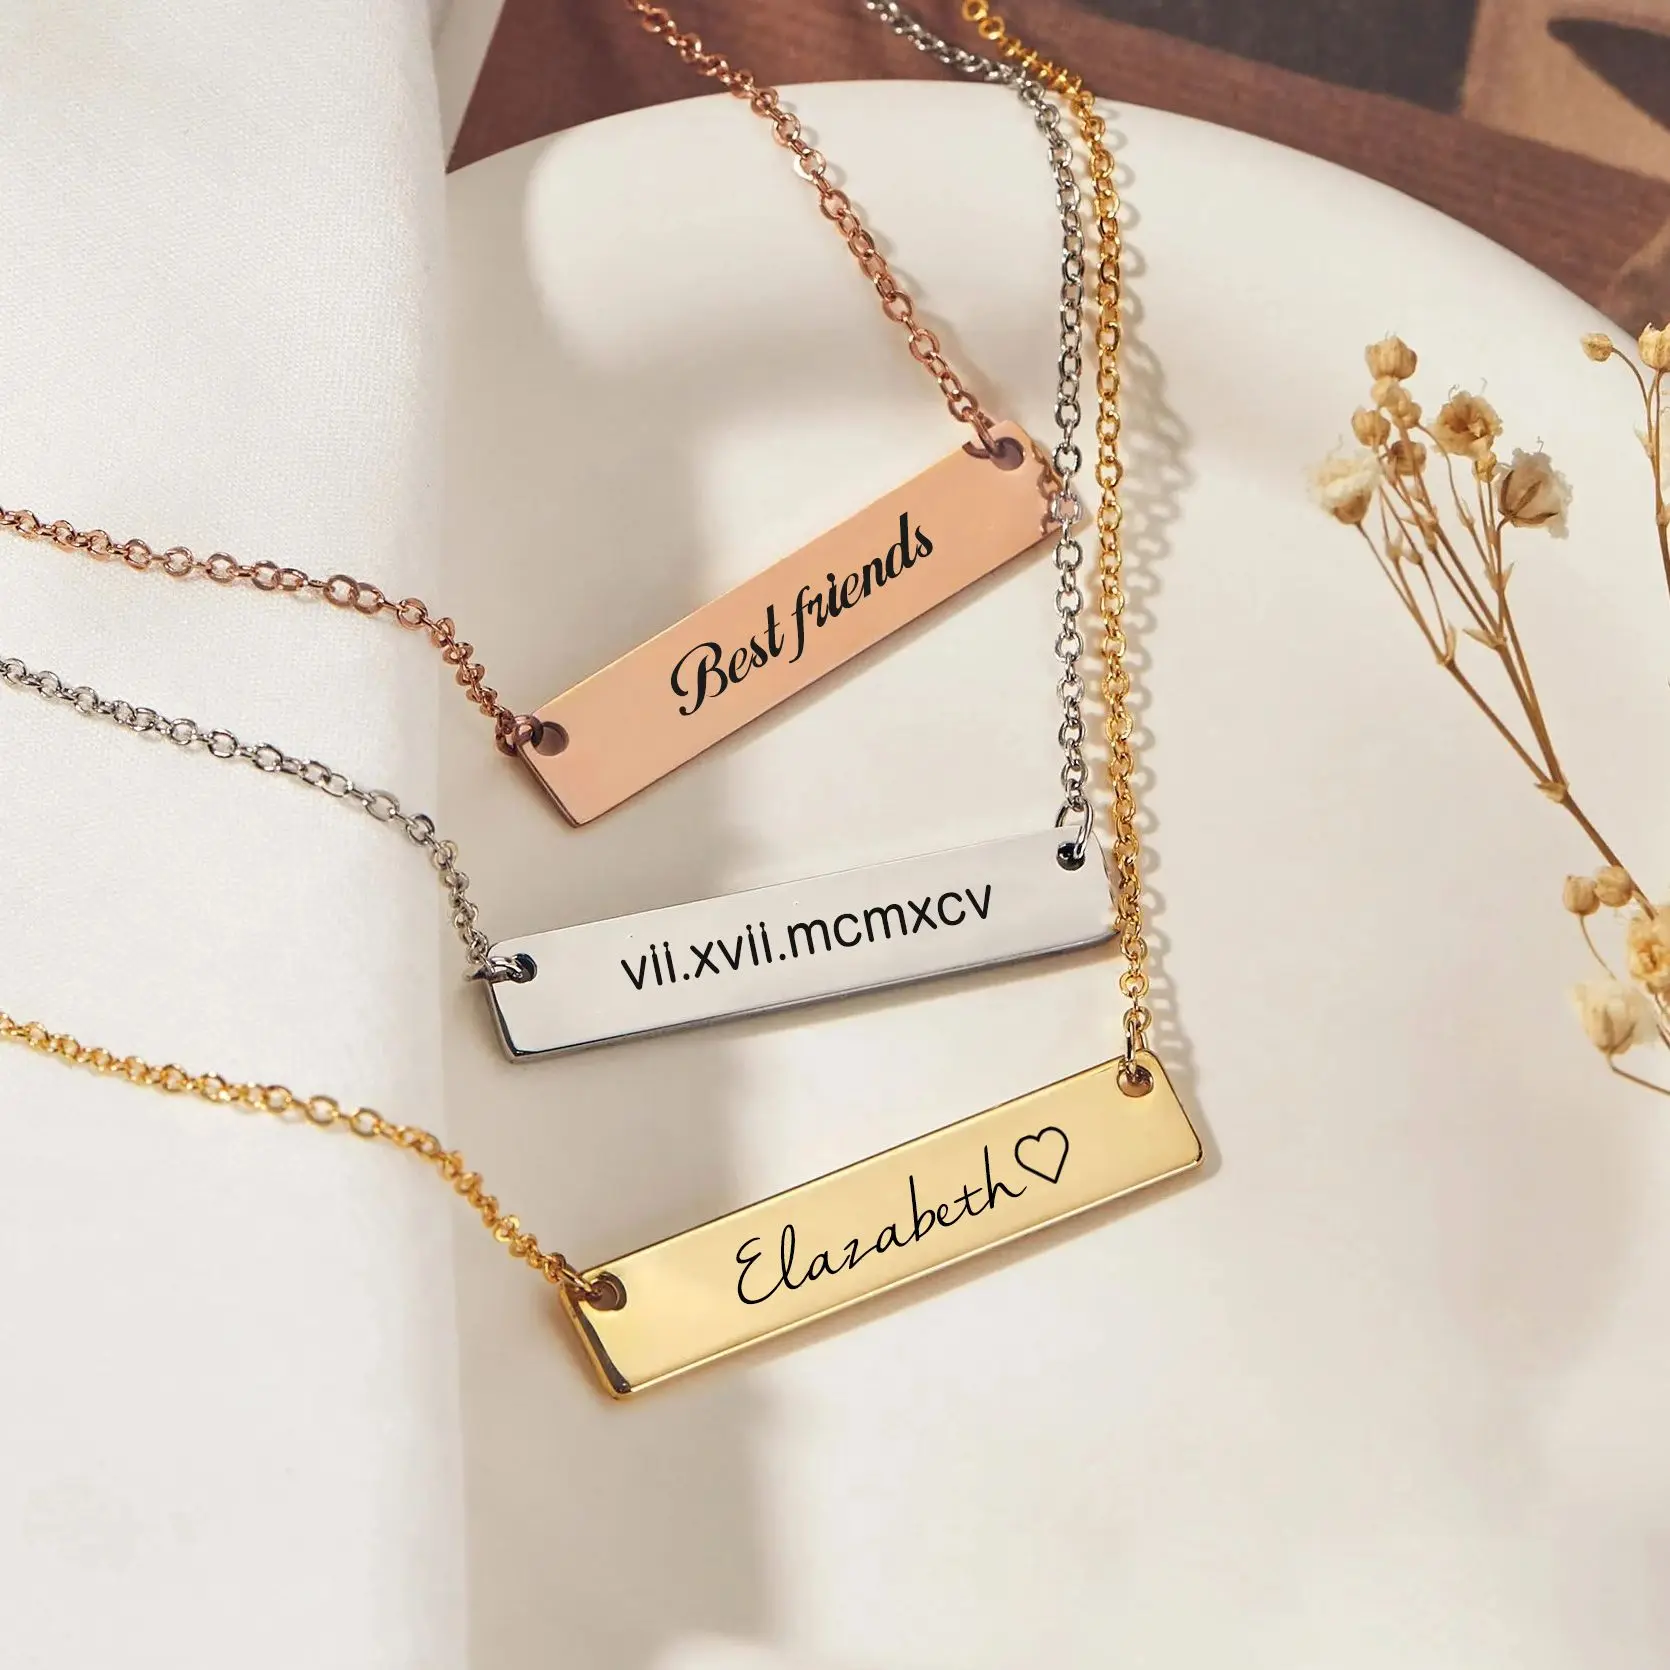 Daily Engraved Name Bar Necklace Custom Text Square Necklace with Rolo Chain Nameplate Jewelry Gift Birthday Gift for Woman wholesale 20pcs lot smart phone stylus pen ball touch pen for capacitive screen personalized with your logo text free shipping